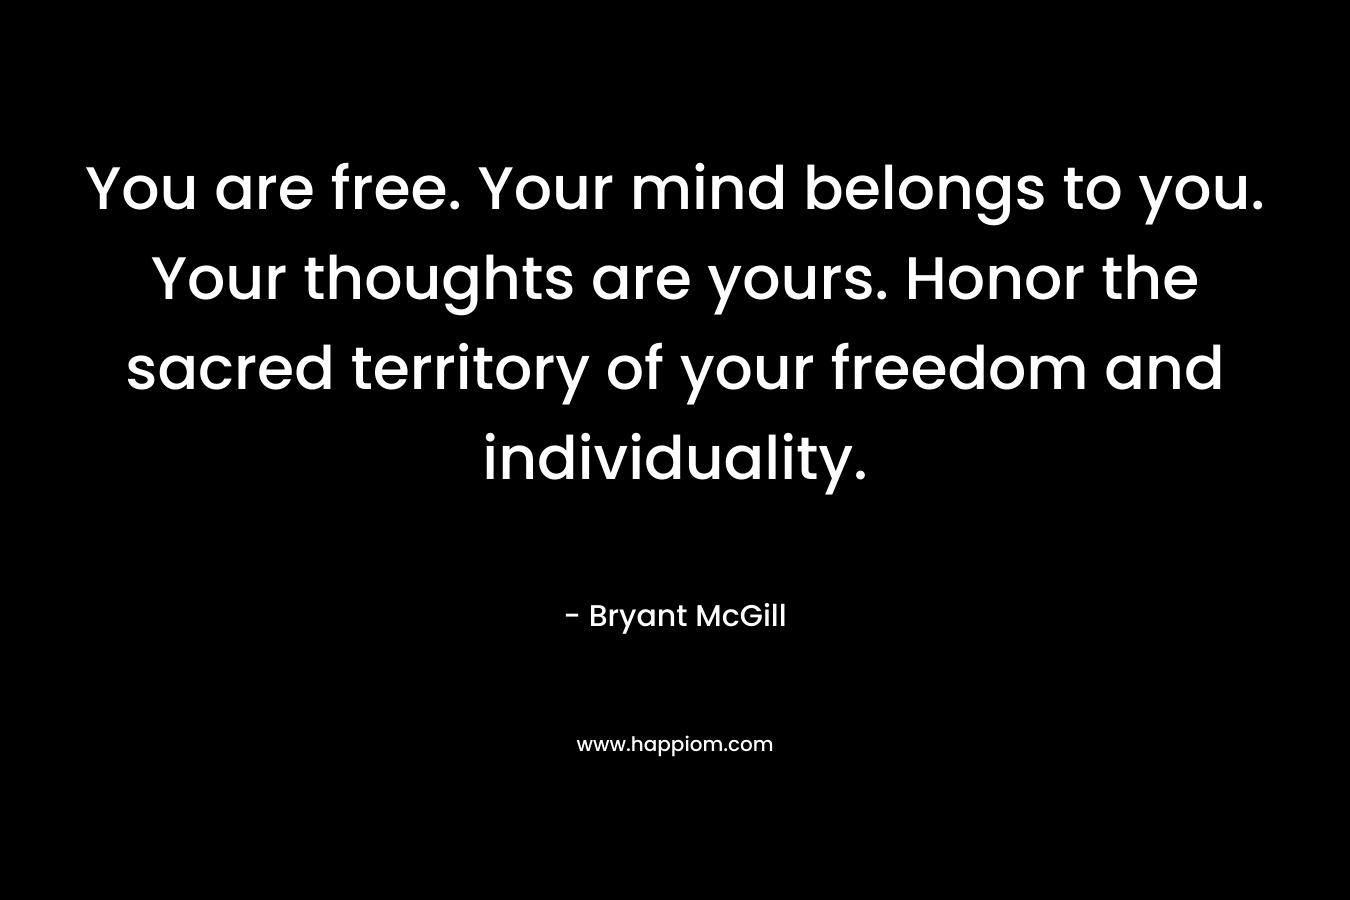 You are free. Your mind belongs to you. Your thoughts are yours. Honor the sacred territory of your freedom and individuality. – Bryant McGill